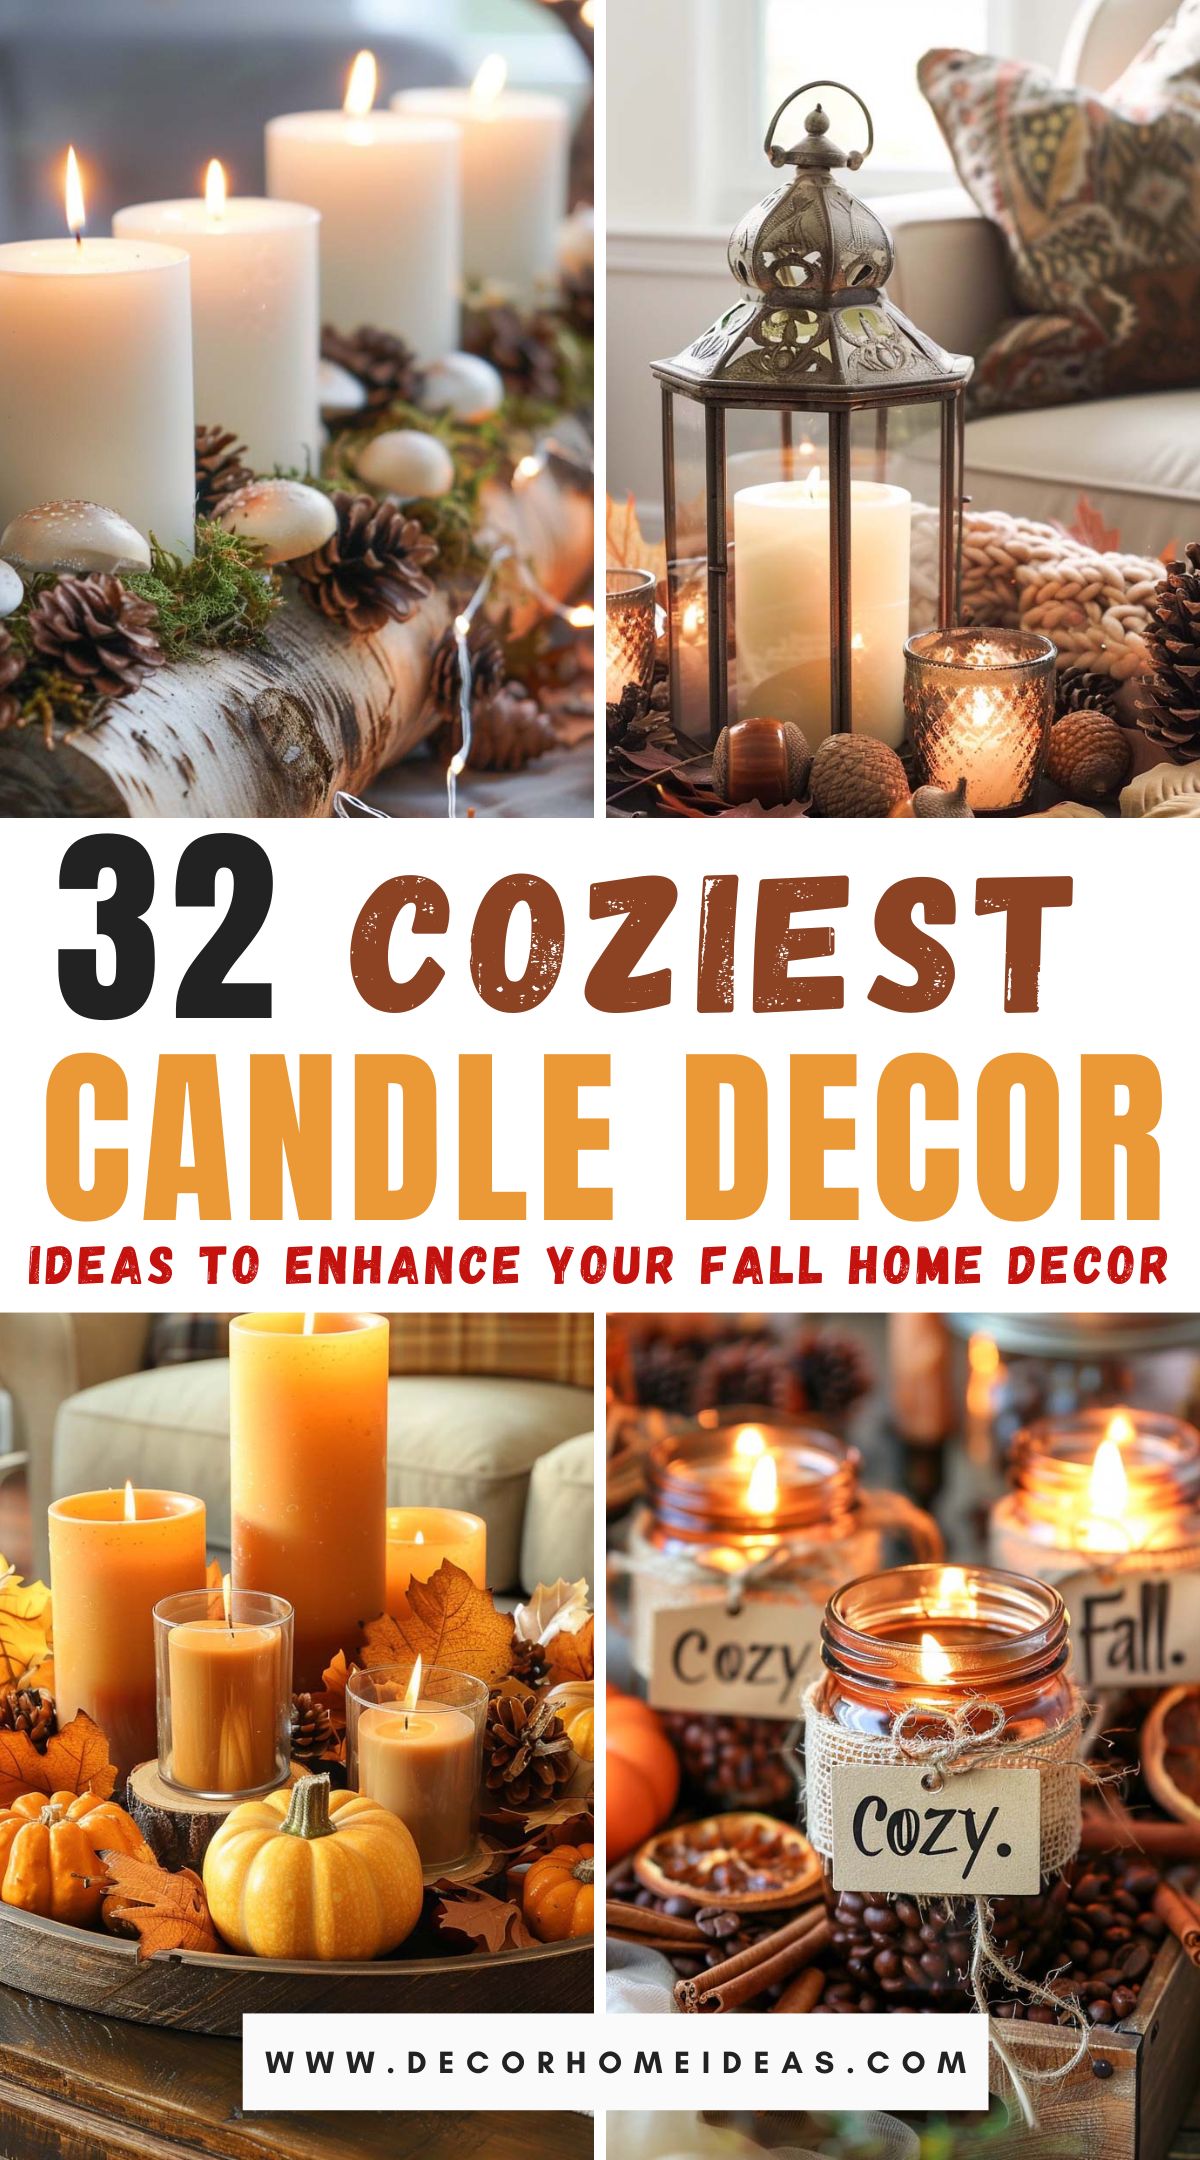 Coziest Candle Decor For Fall Home Decor